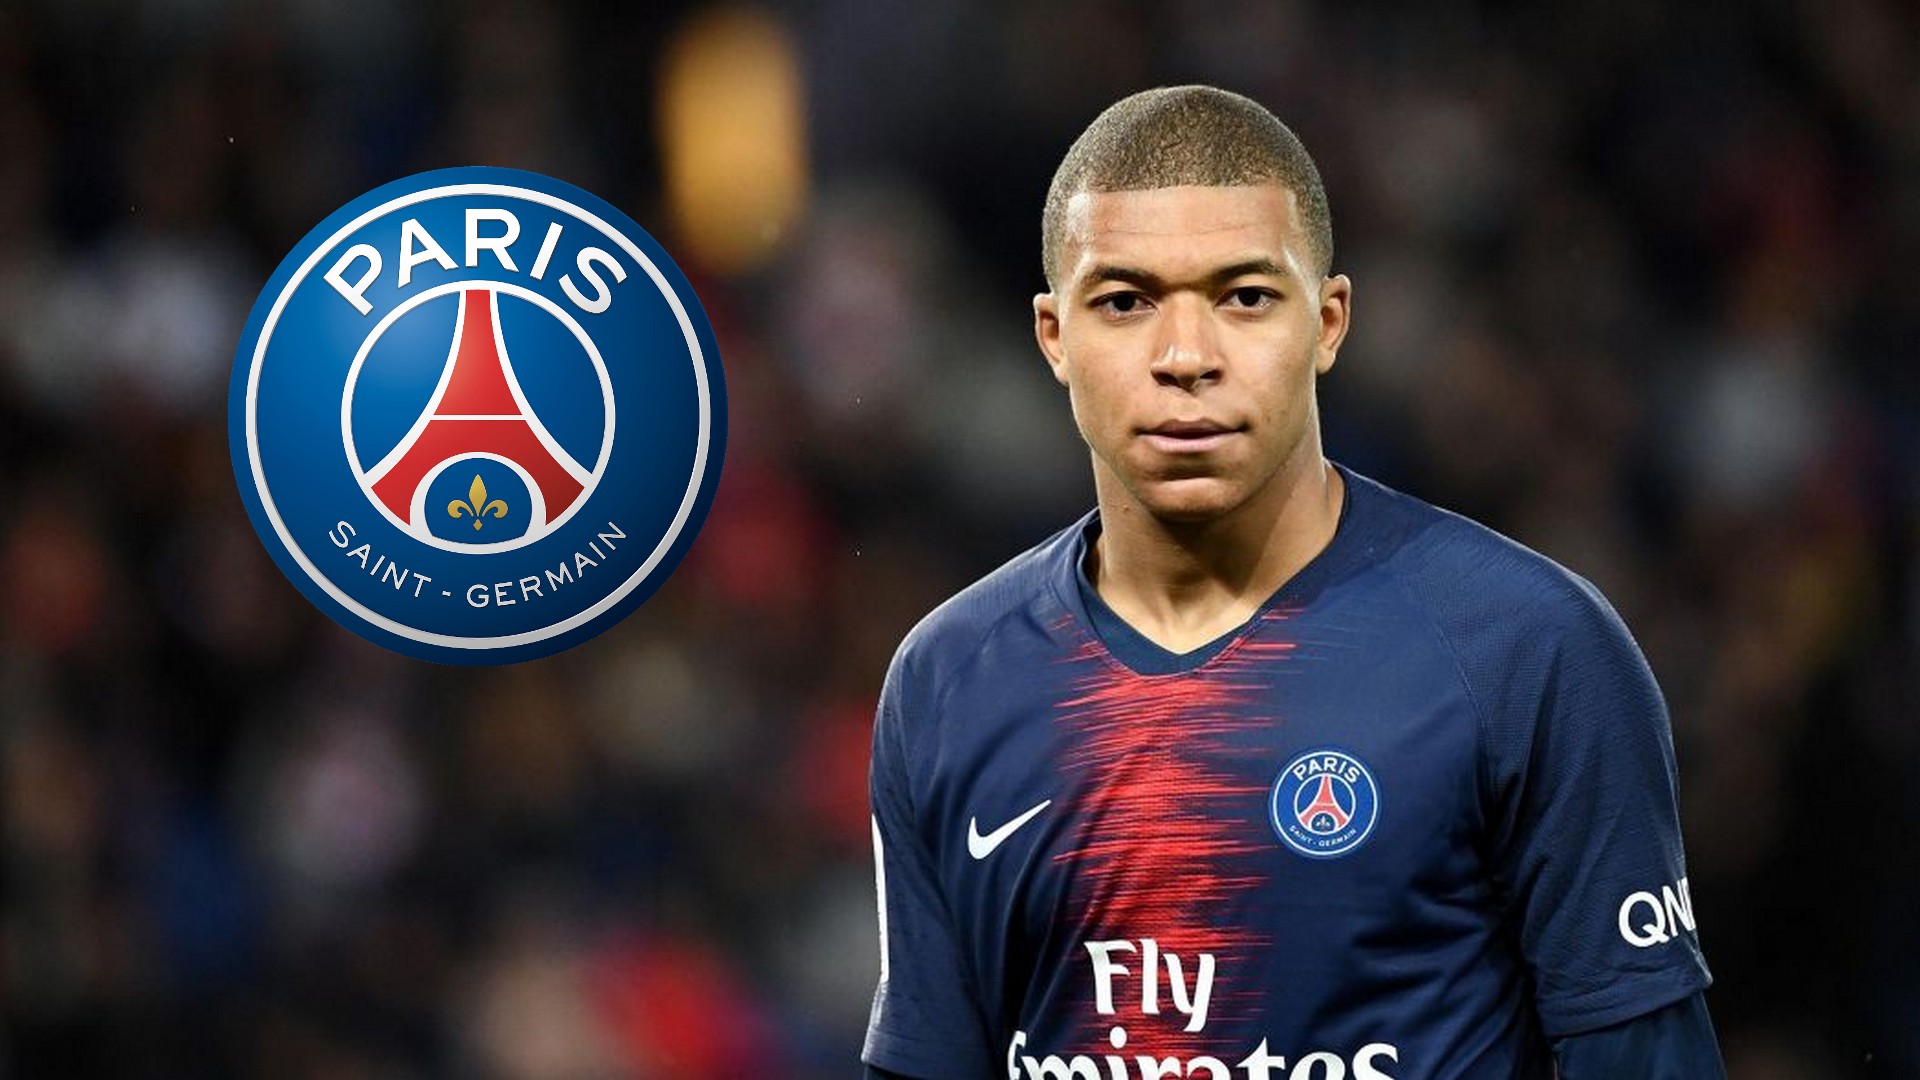 Kylian Mbappe PSG For PC Wallpaper with resolution 1920x1080 pixel. You can make this wallpaper for your Mac or Windows Desktop Background, iPhone, Android or Tablet and another Smartphone device